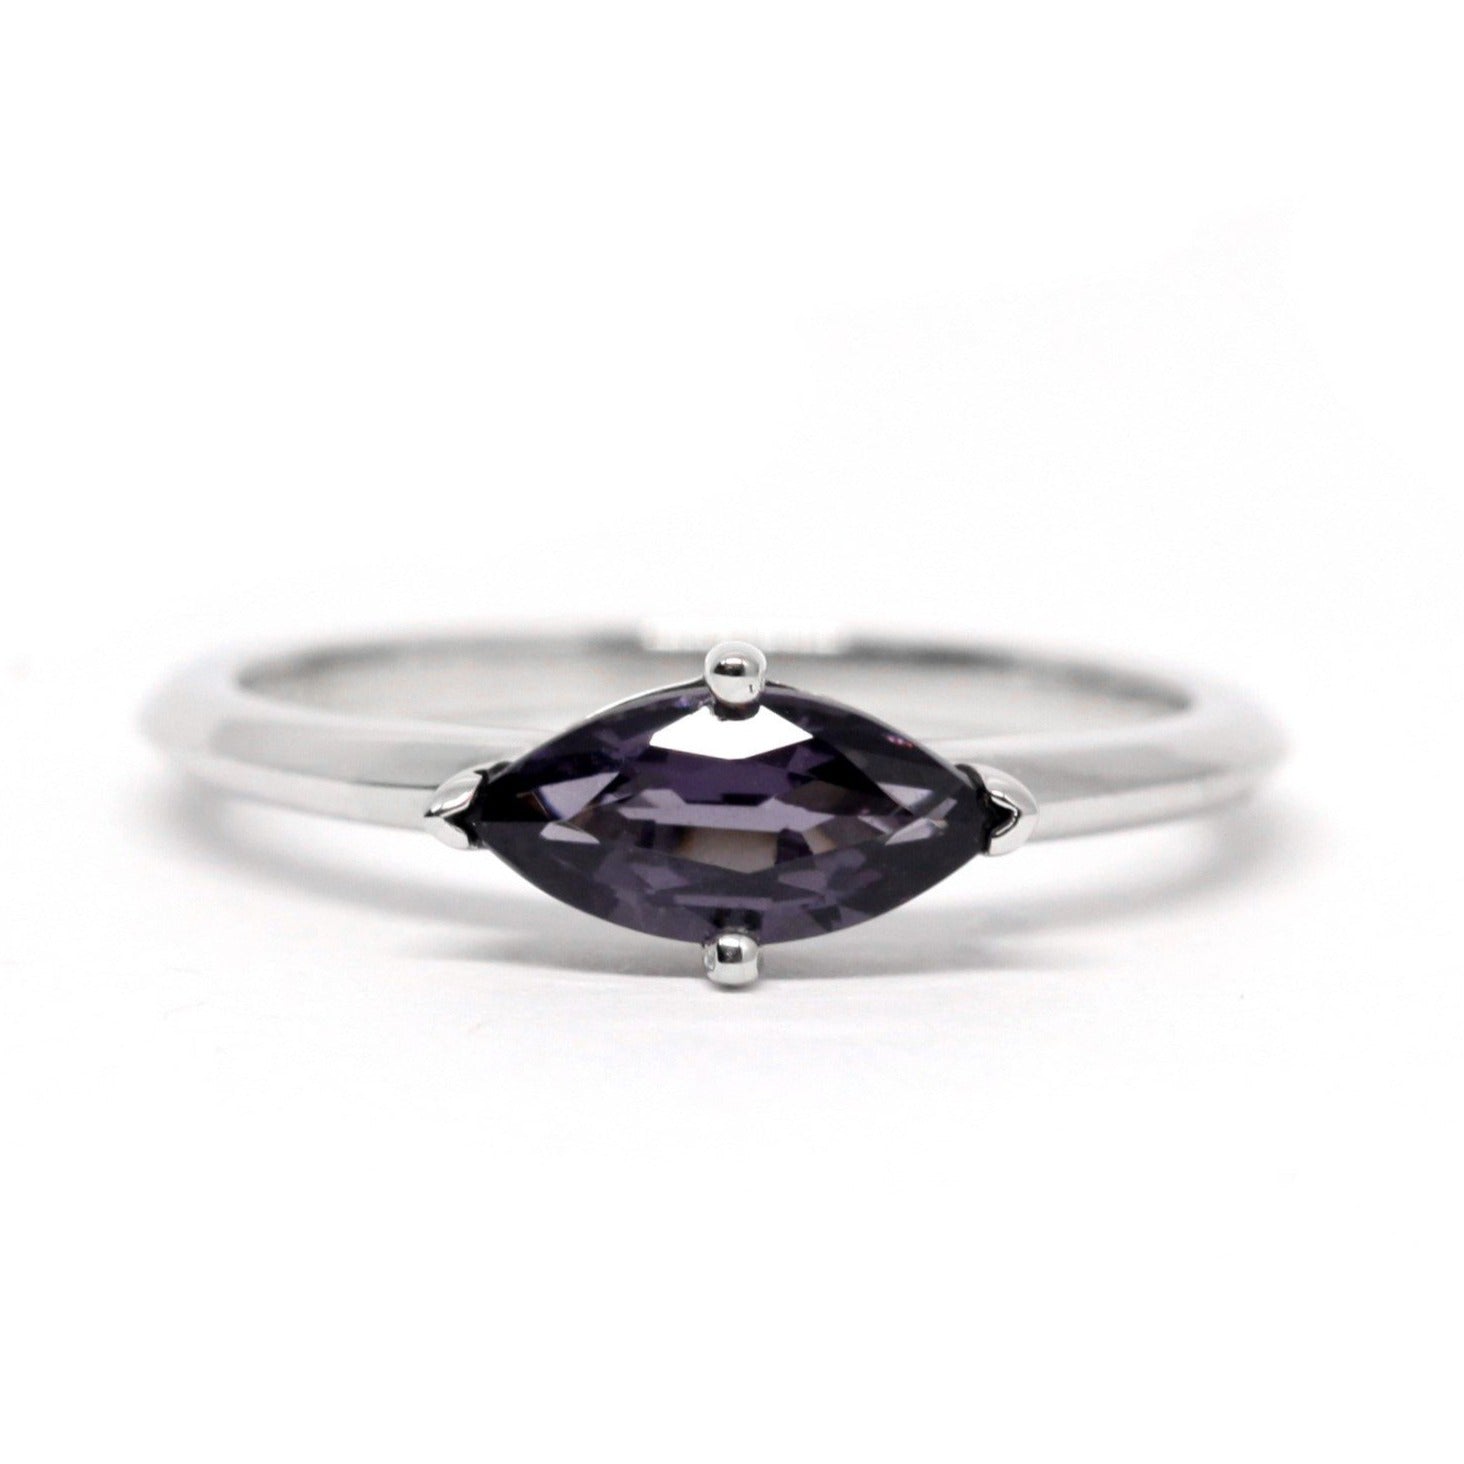 Marquise Shape Spinel Purple Bena Jewelry Custom Made Color Gemstone Ring Bridal Engagement Color Gemstone Montreal Made in Canada White Gold Ring Edgy Style